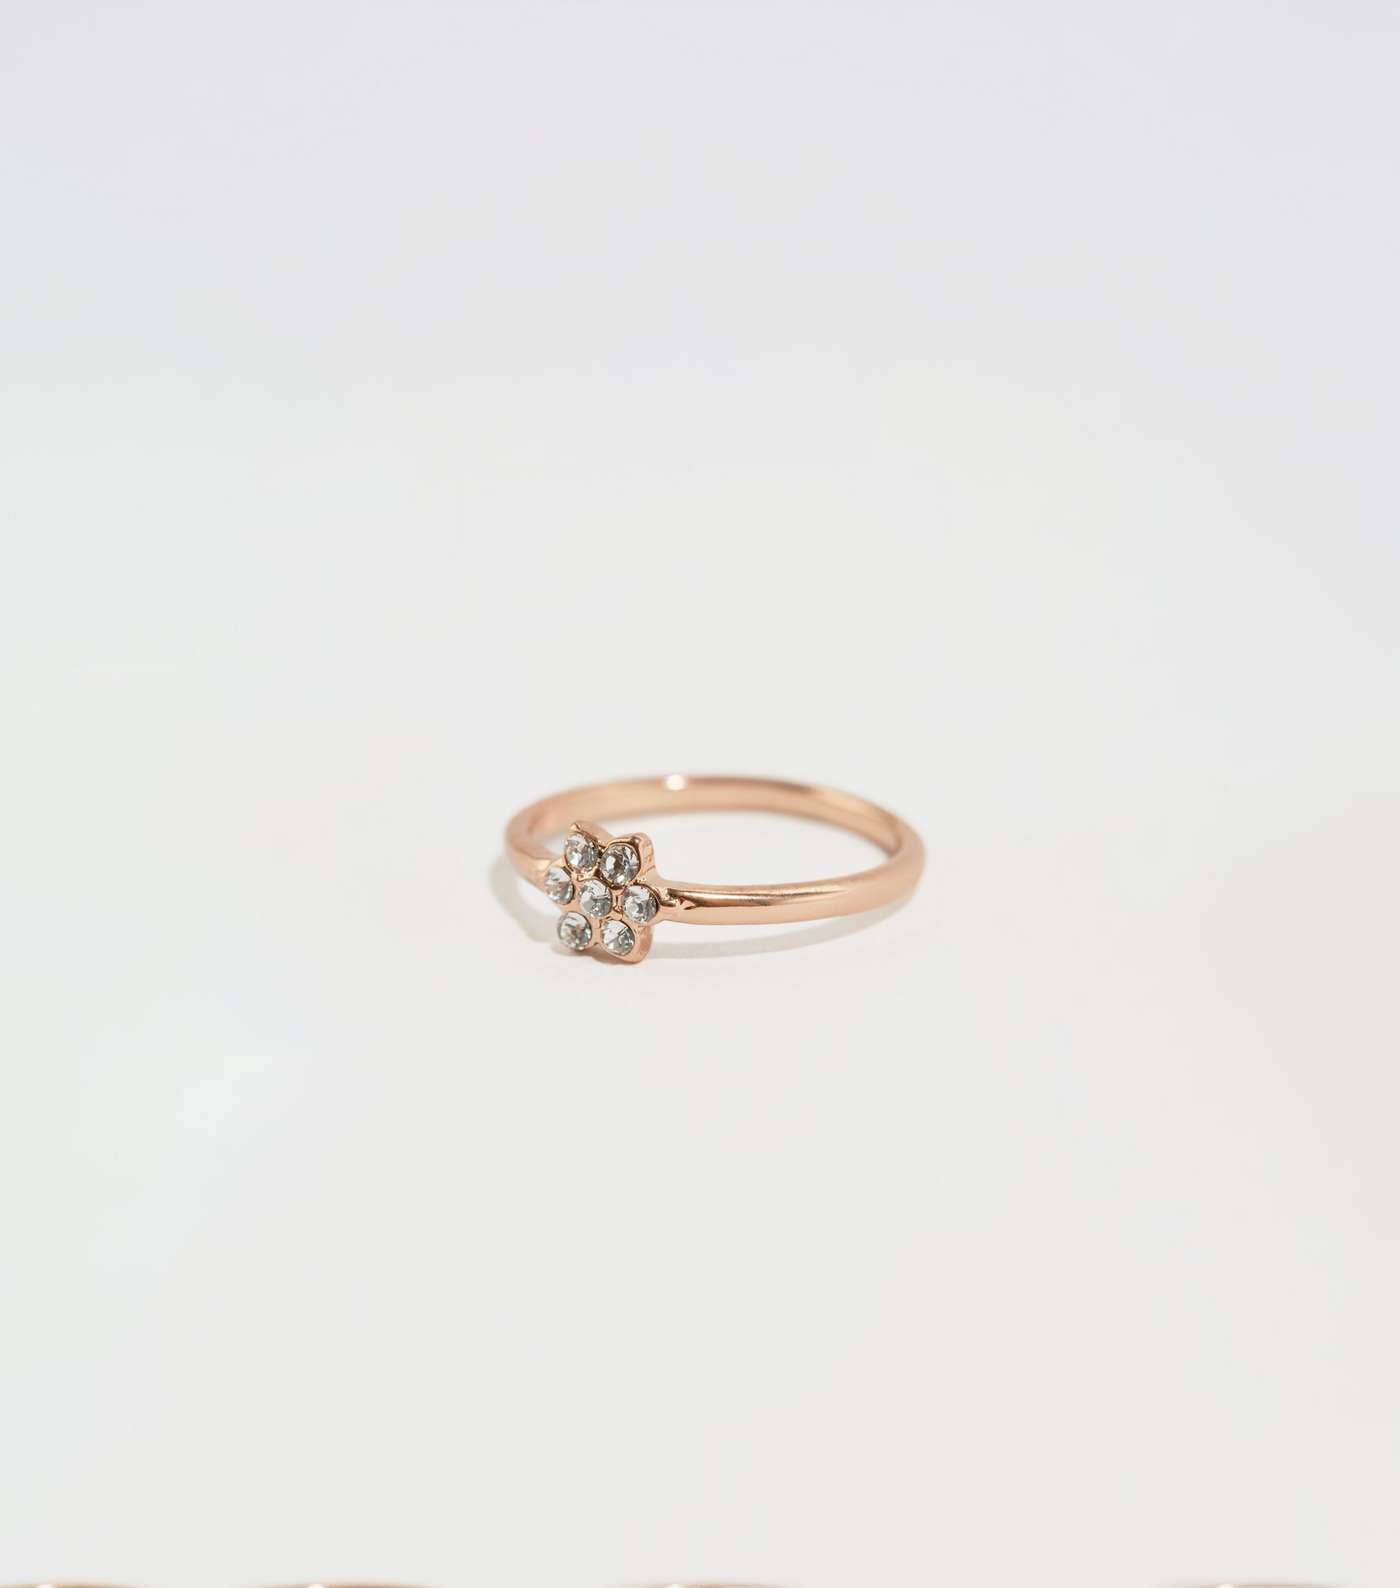 Rose Gold Flower Ring with Crystals from Swarovski® Image 2